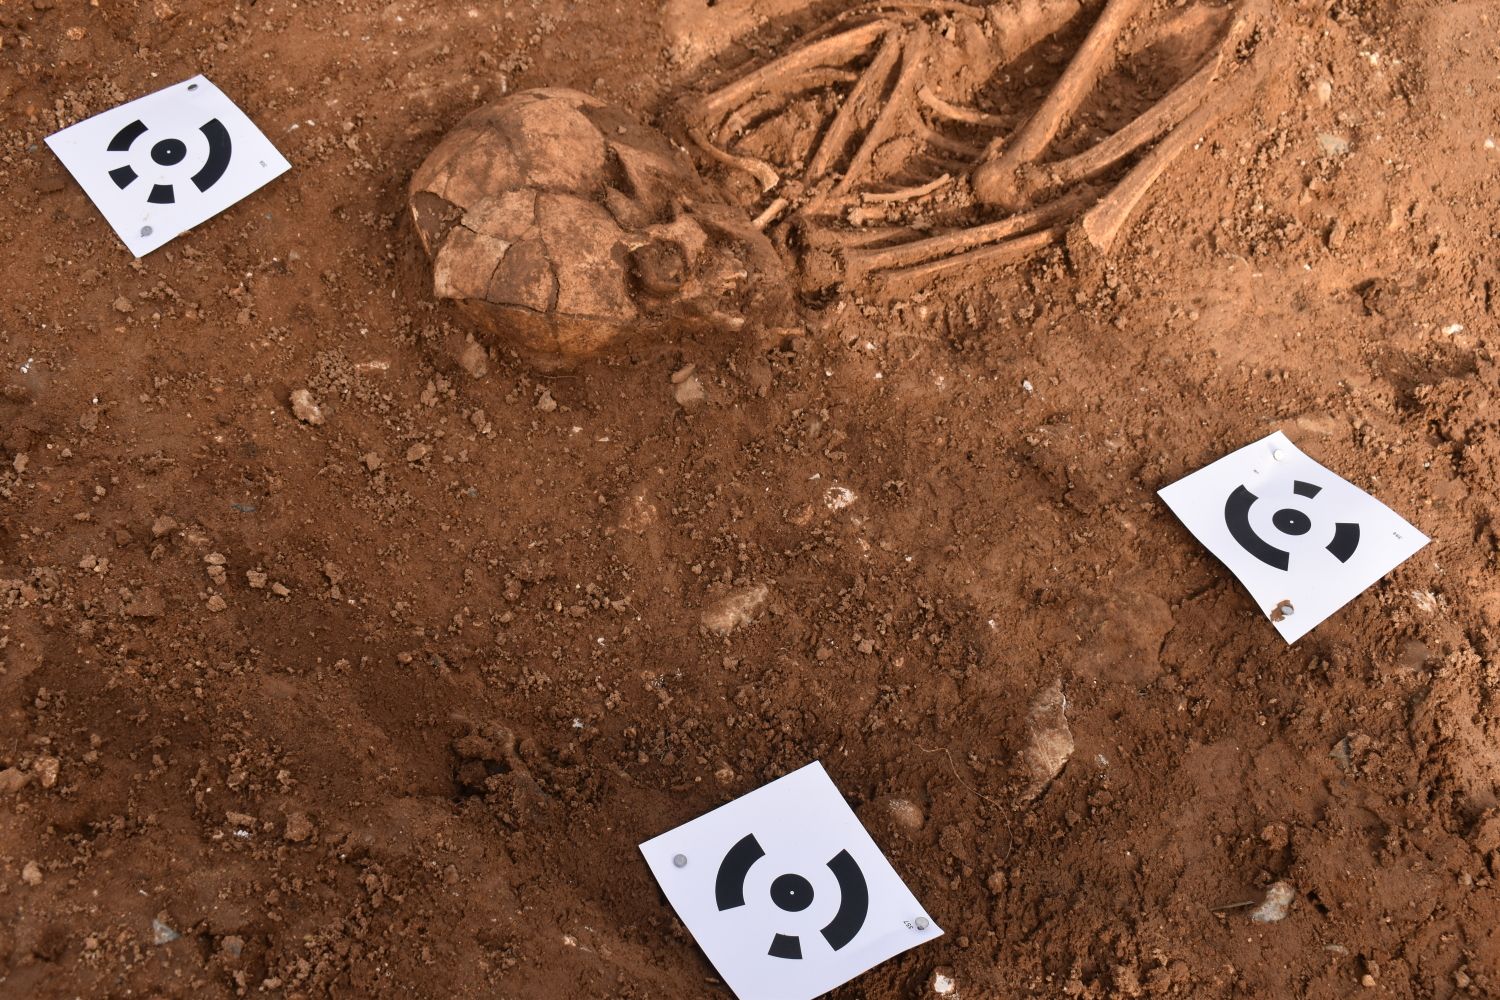 Black and white card targets on the ground beside a skeleton found in the barrow ditch.